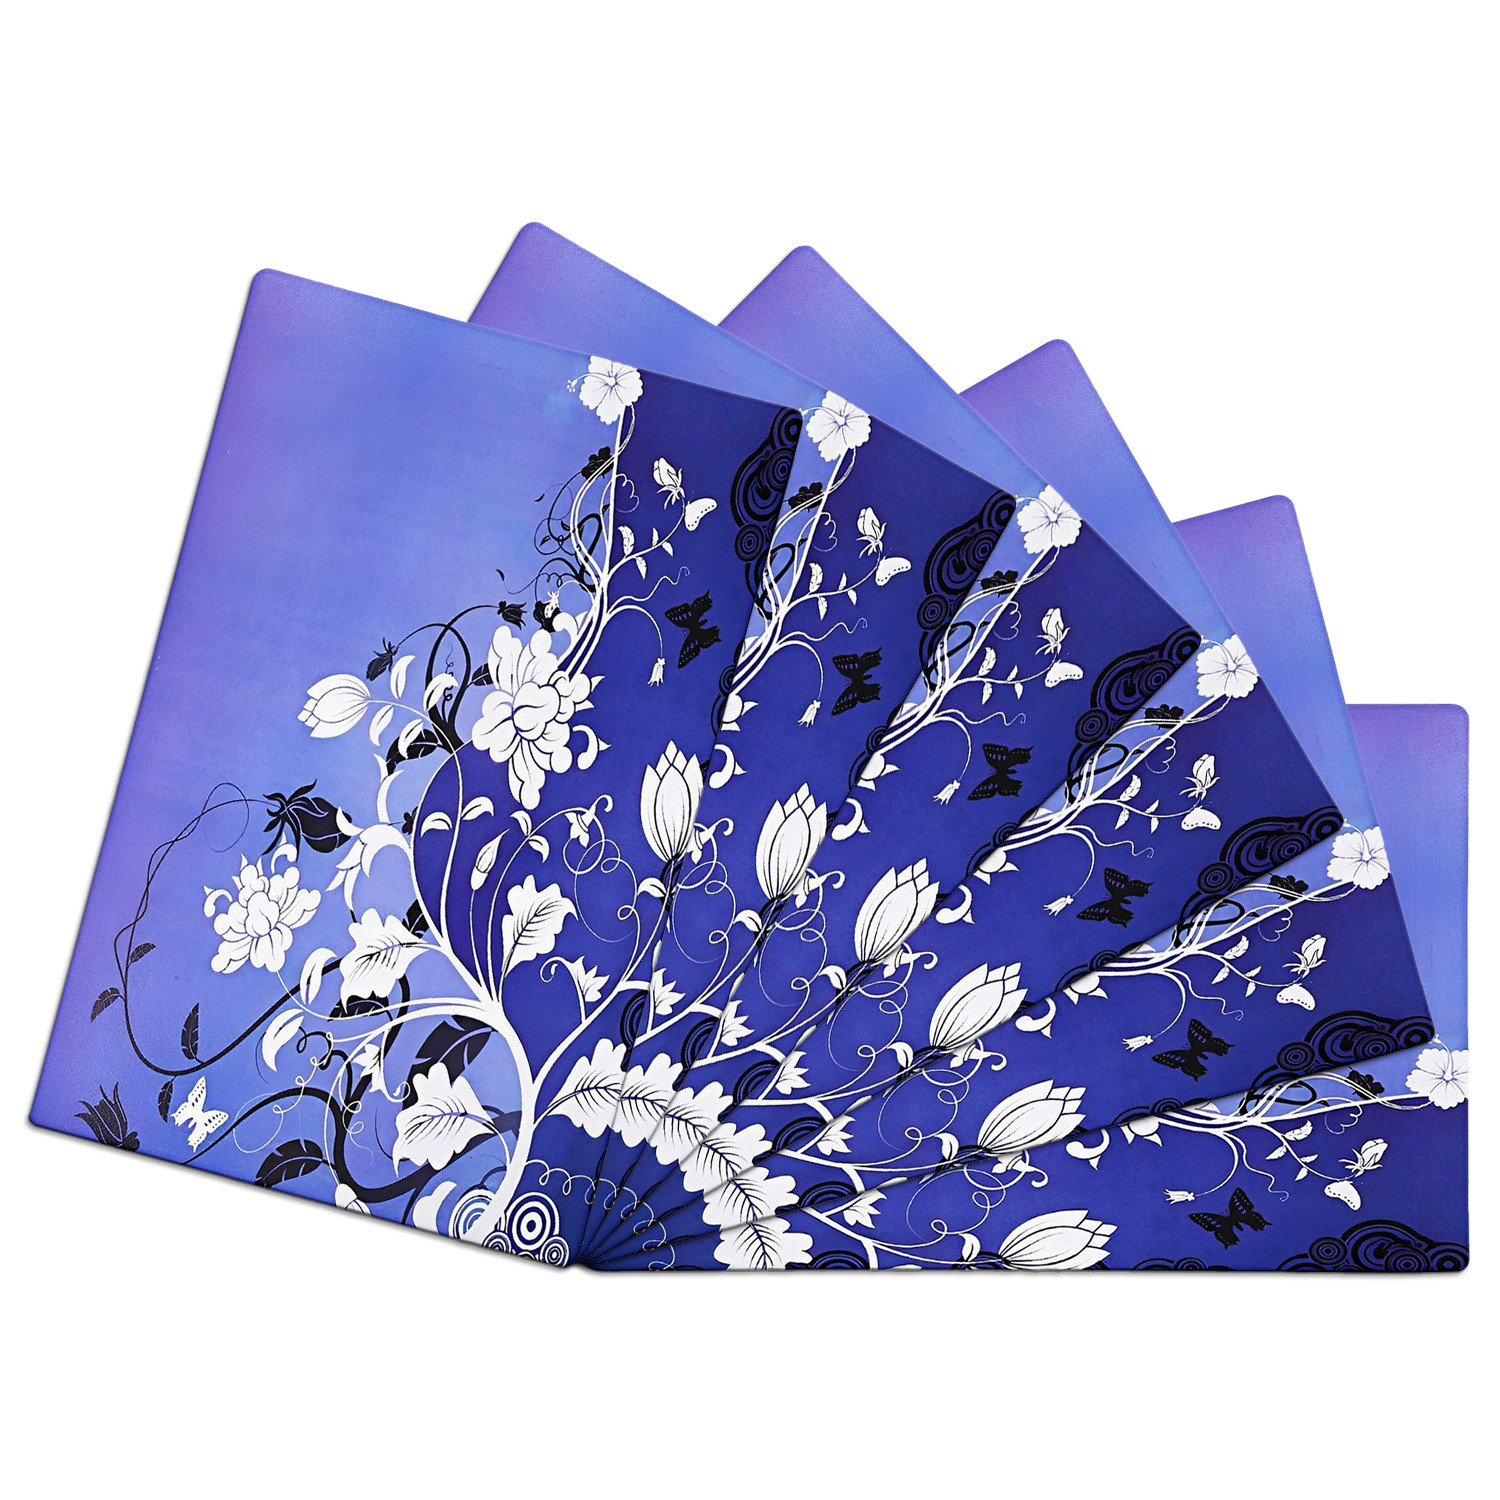 Kuber Industries Dining Table Mat | PVC Blue & White Flower Print | Table Mat | Placemats for Kitchen | Refrigerator Liners Mats | Shelf Liner Mat | Set of 6 | Multicolor